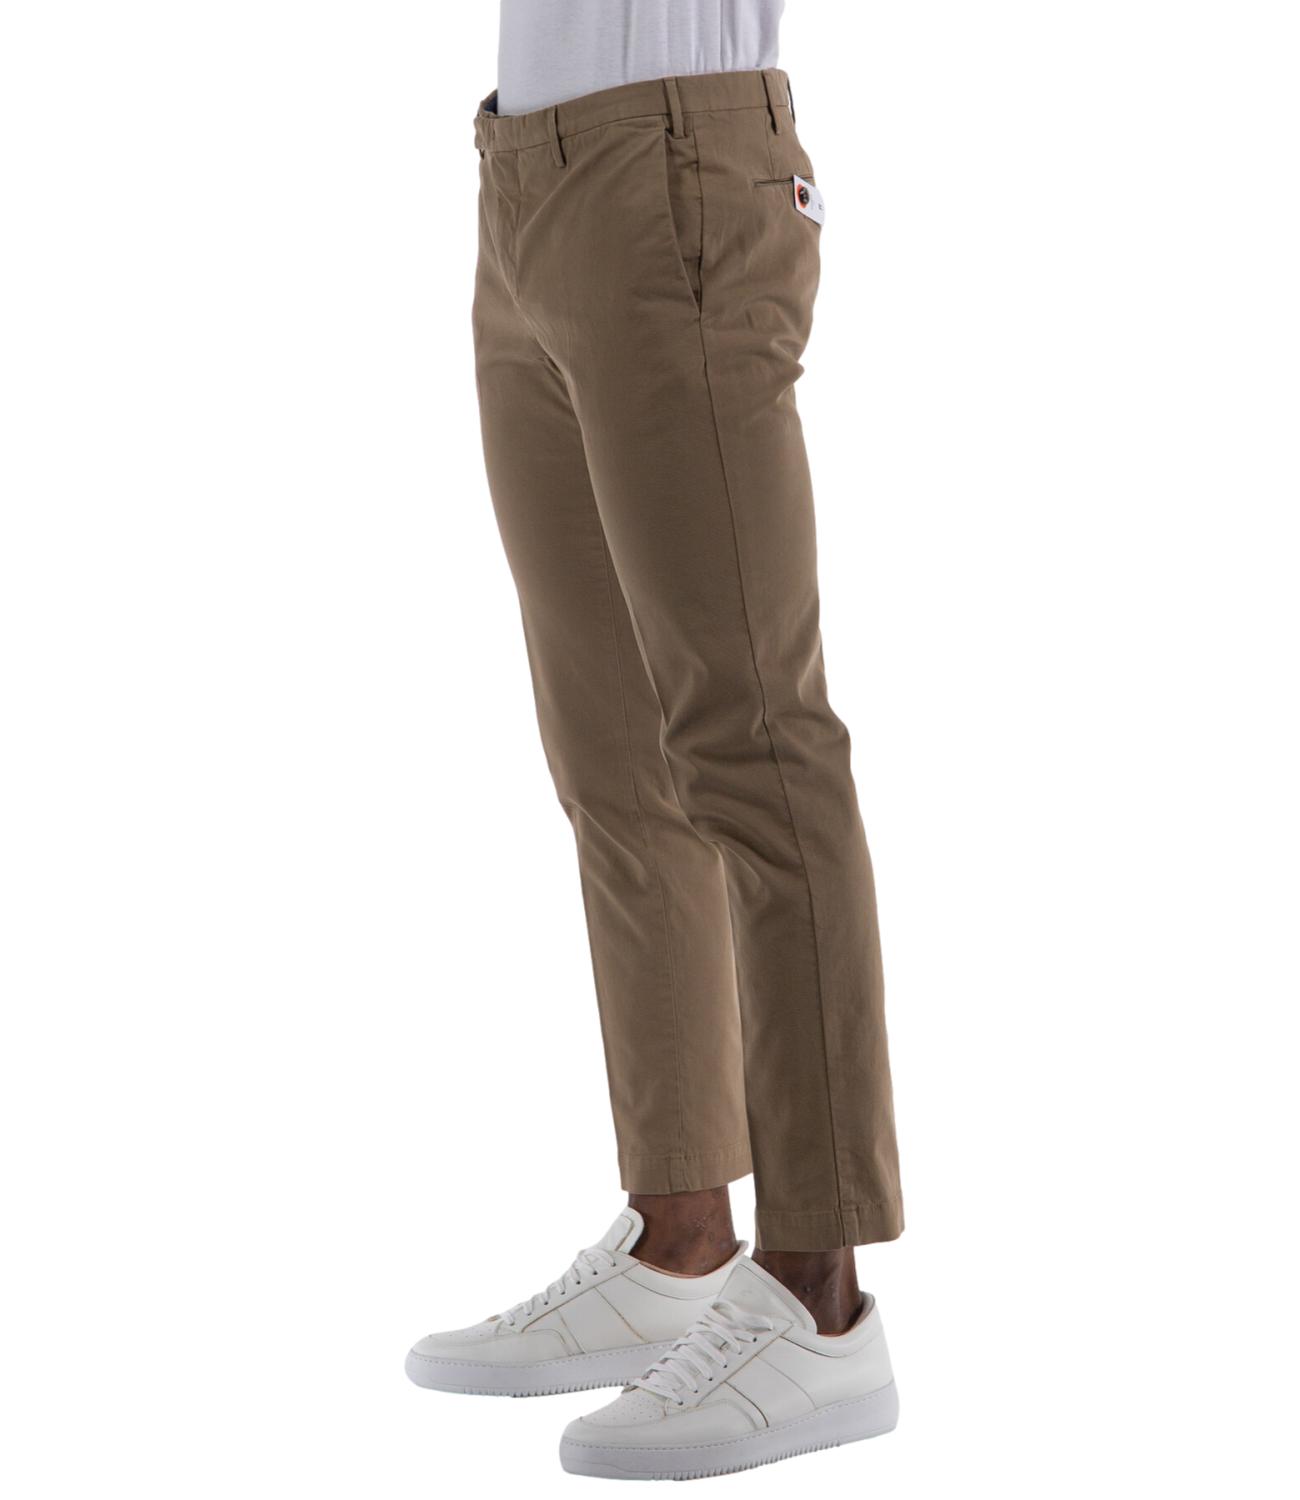 PT Torino men's trousers in colonial camel color L.30